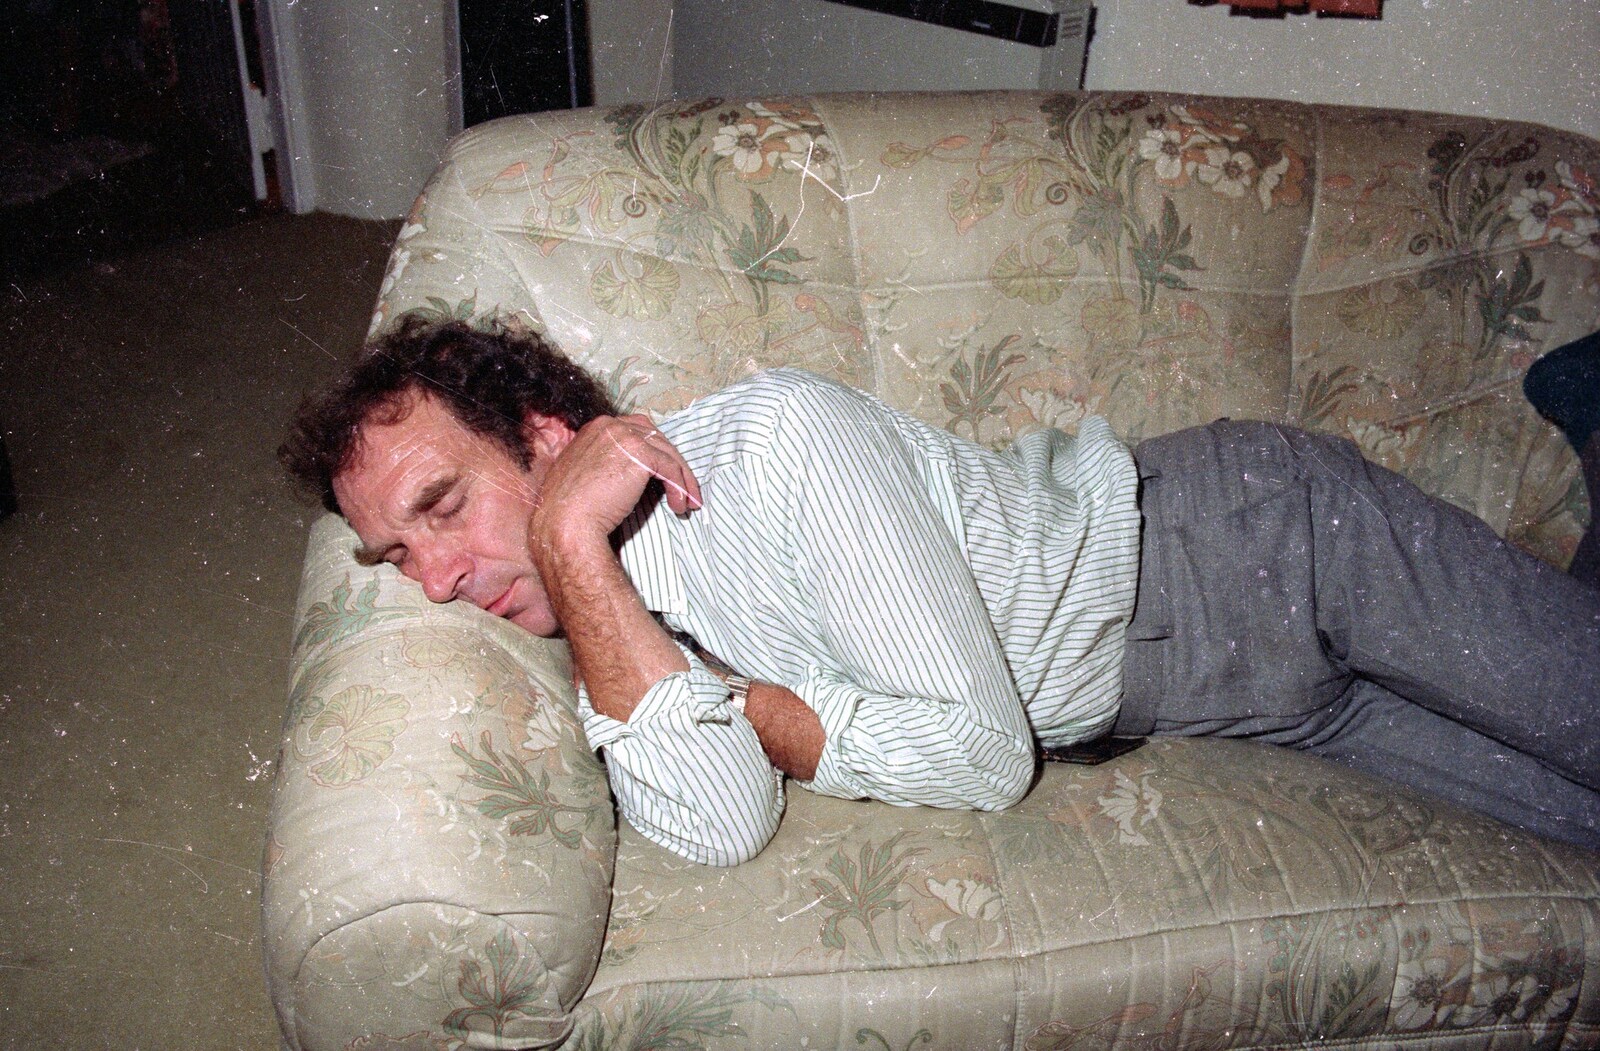 Mike has a snooze from A Trip to Bracken Way, Walkford, Dorset - 8th September 1987